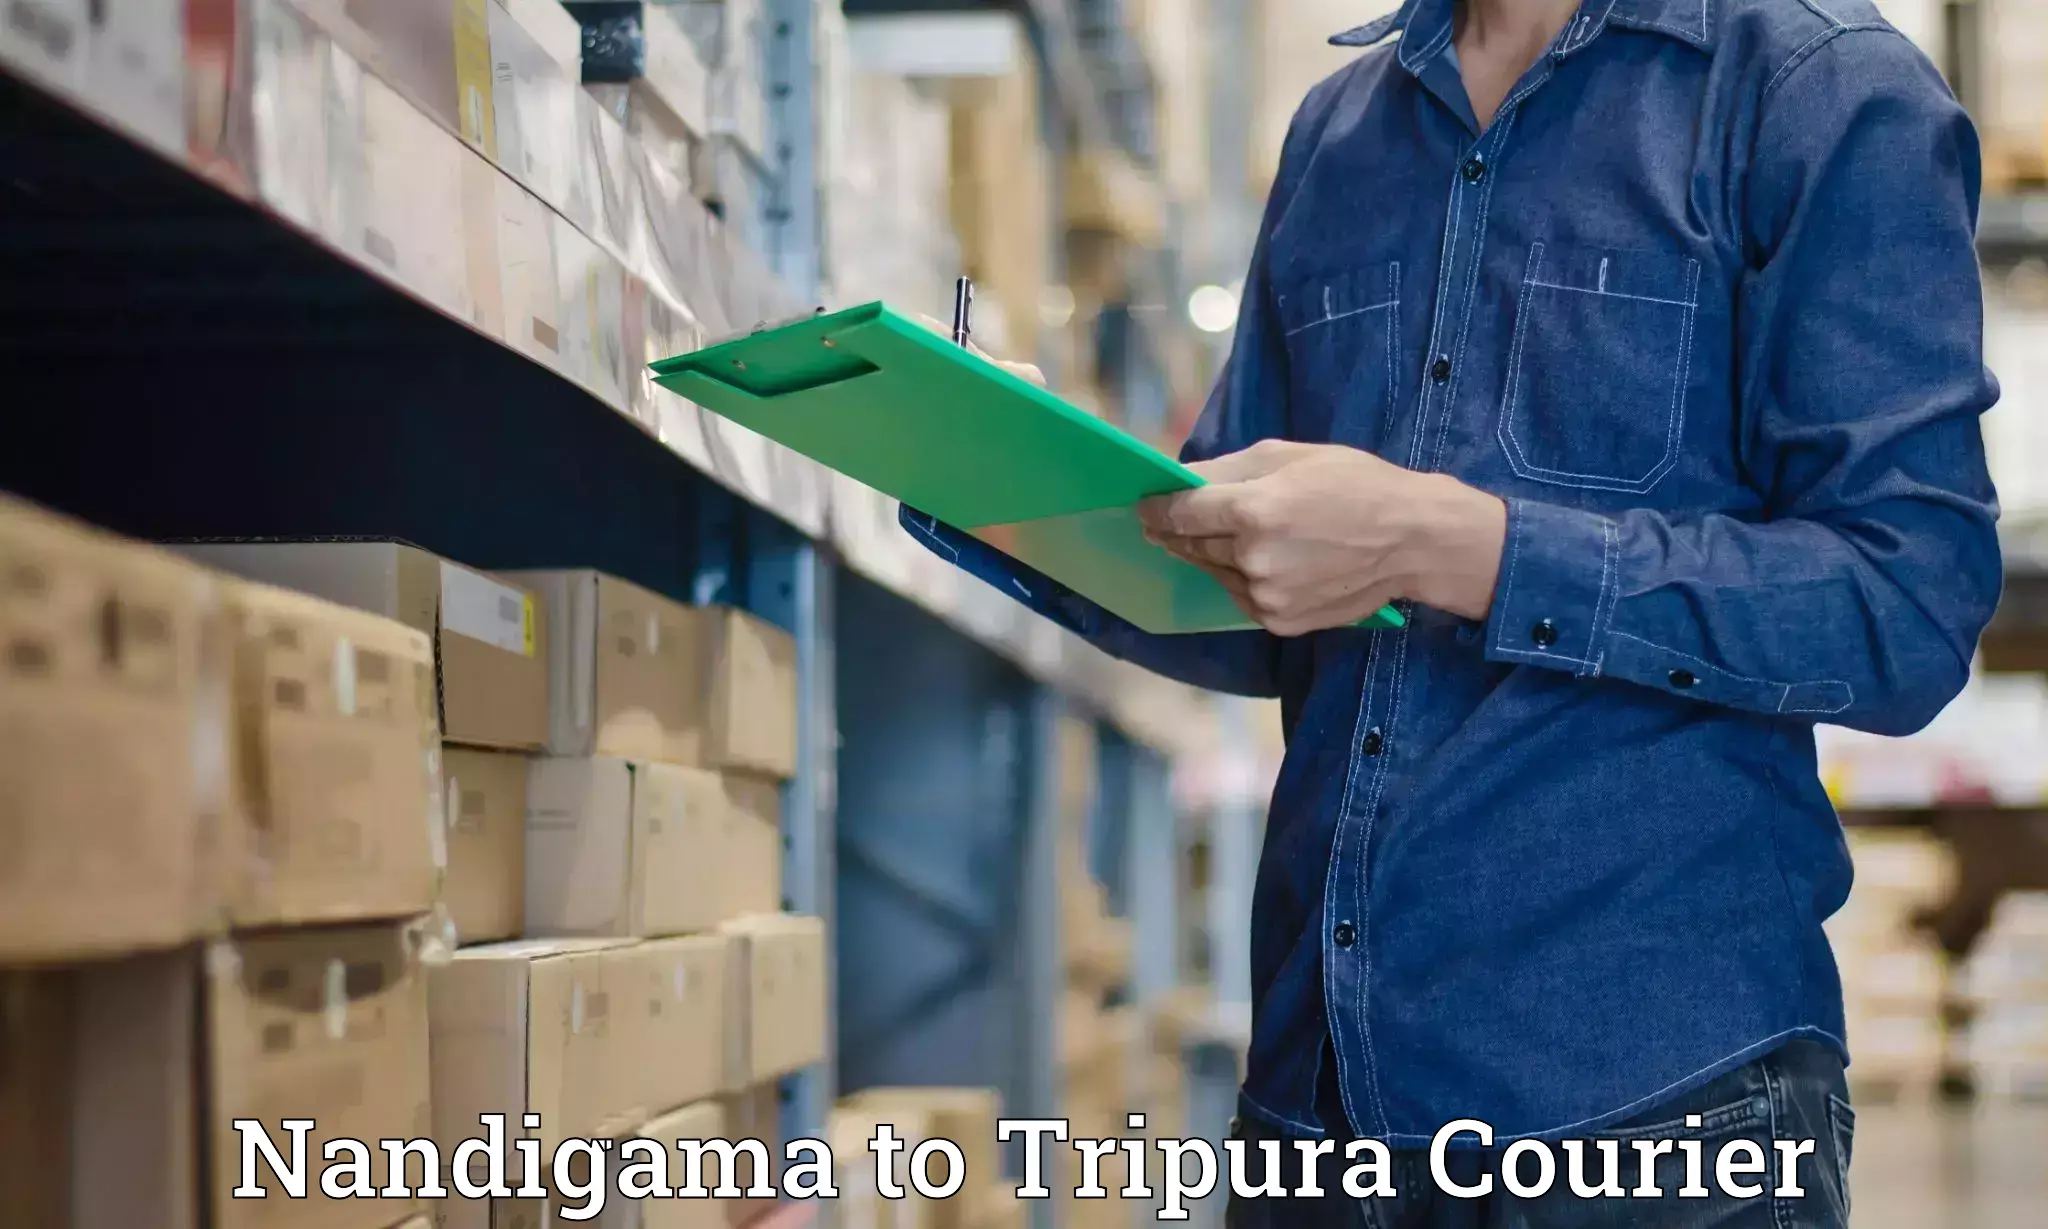 On-call courier service Nandigama to Udaipur Tripura